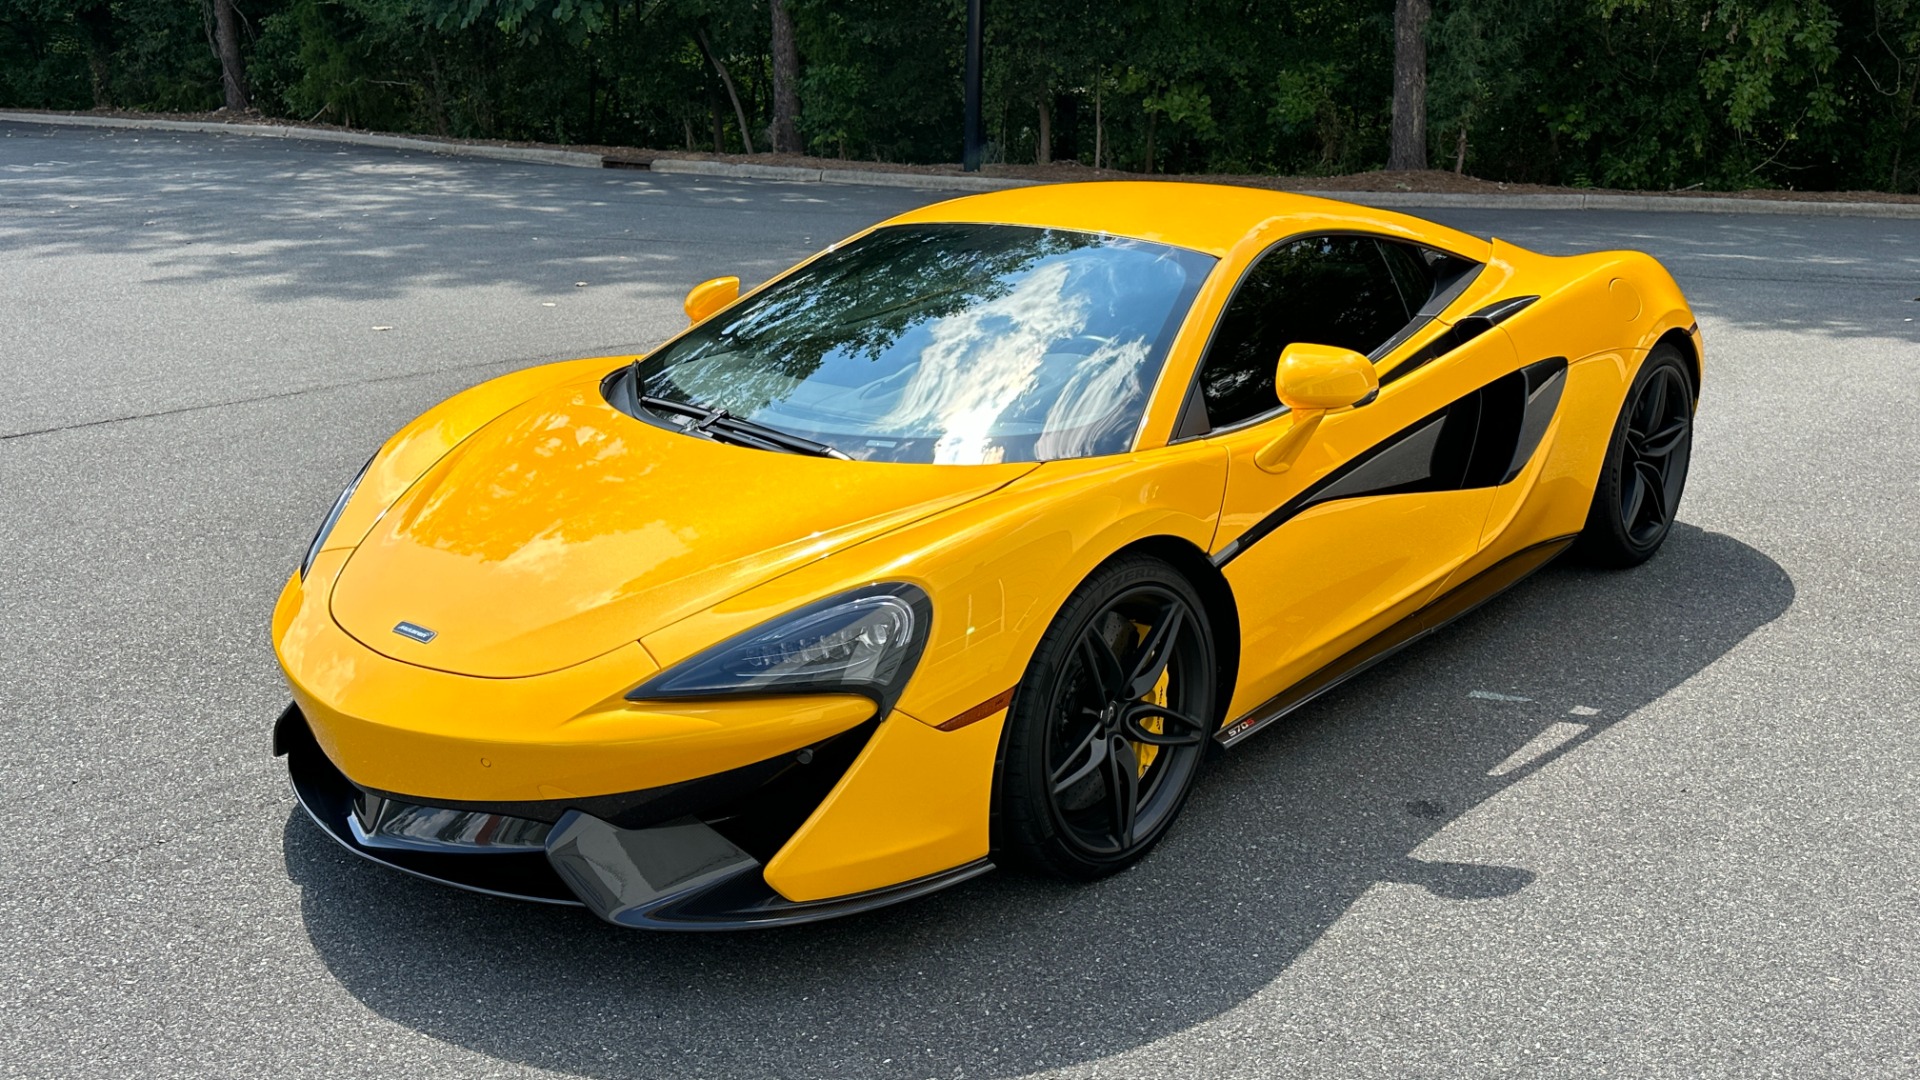 Used 2016 McLaren 570S COUPE / FULL PAINT PROTECTION / NEW TIRES / VOLCANO YELLOW for sale $156,995 at Formula Imports in Charlotte NC 28227 6